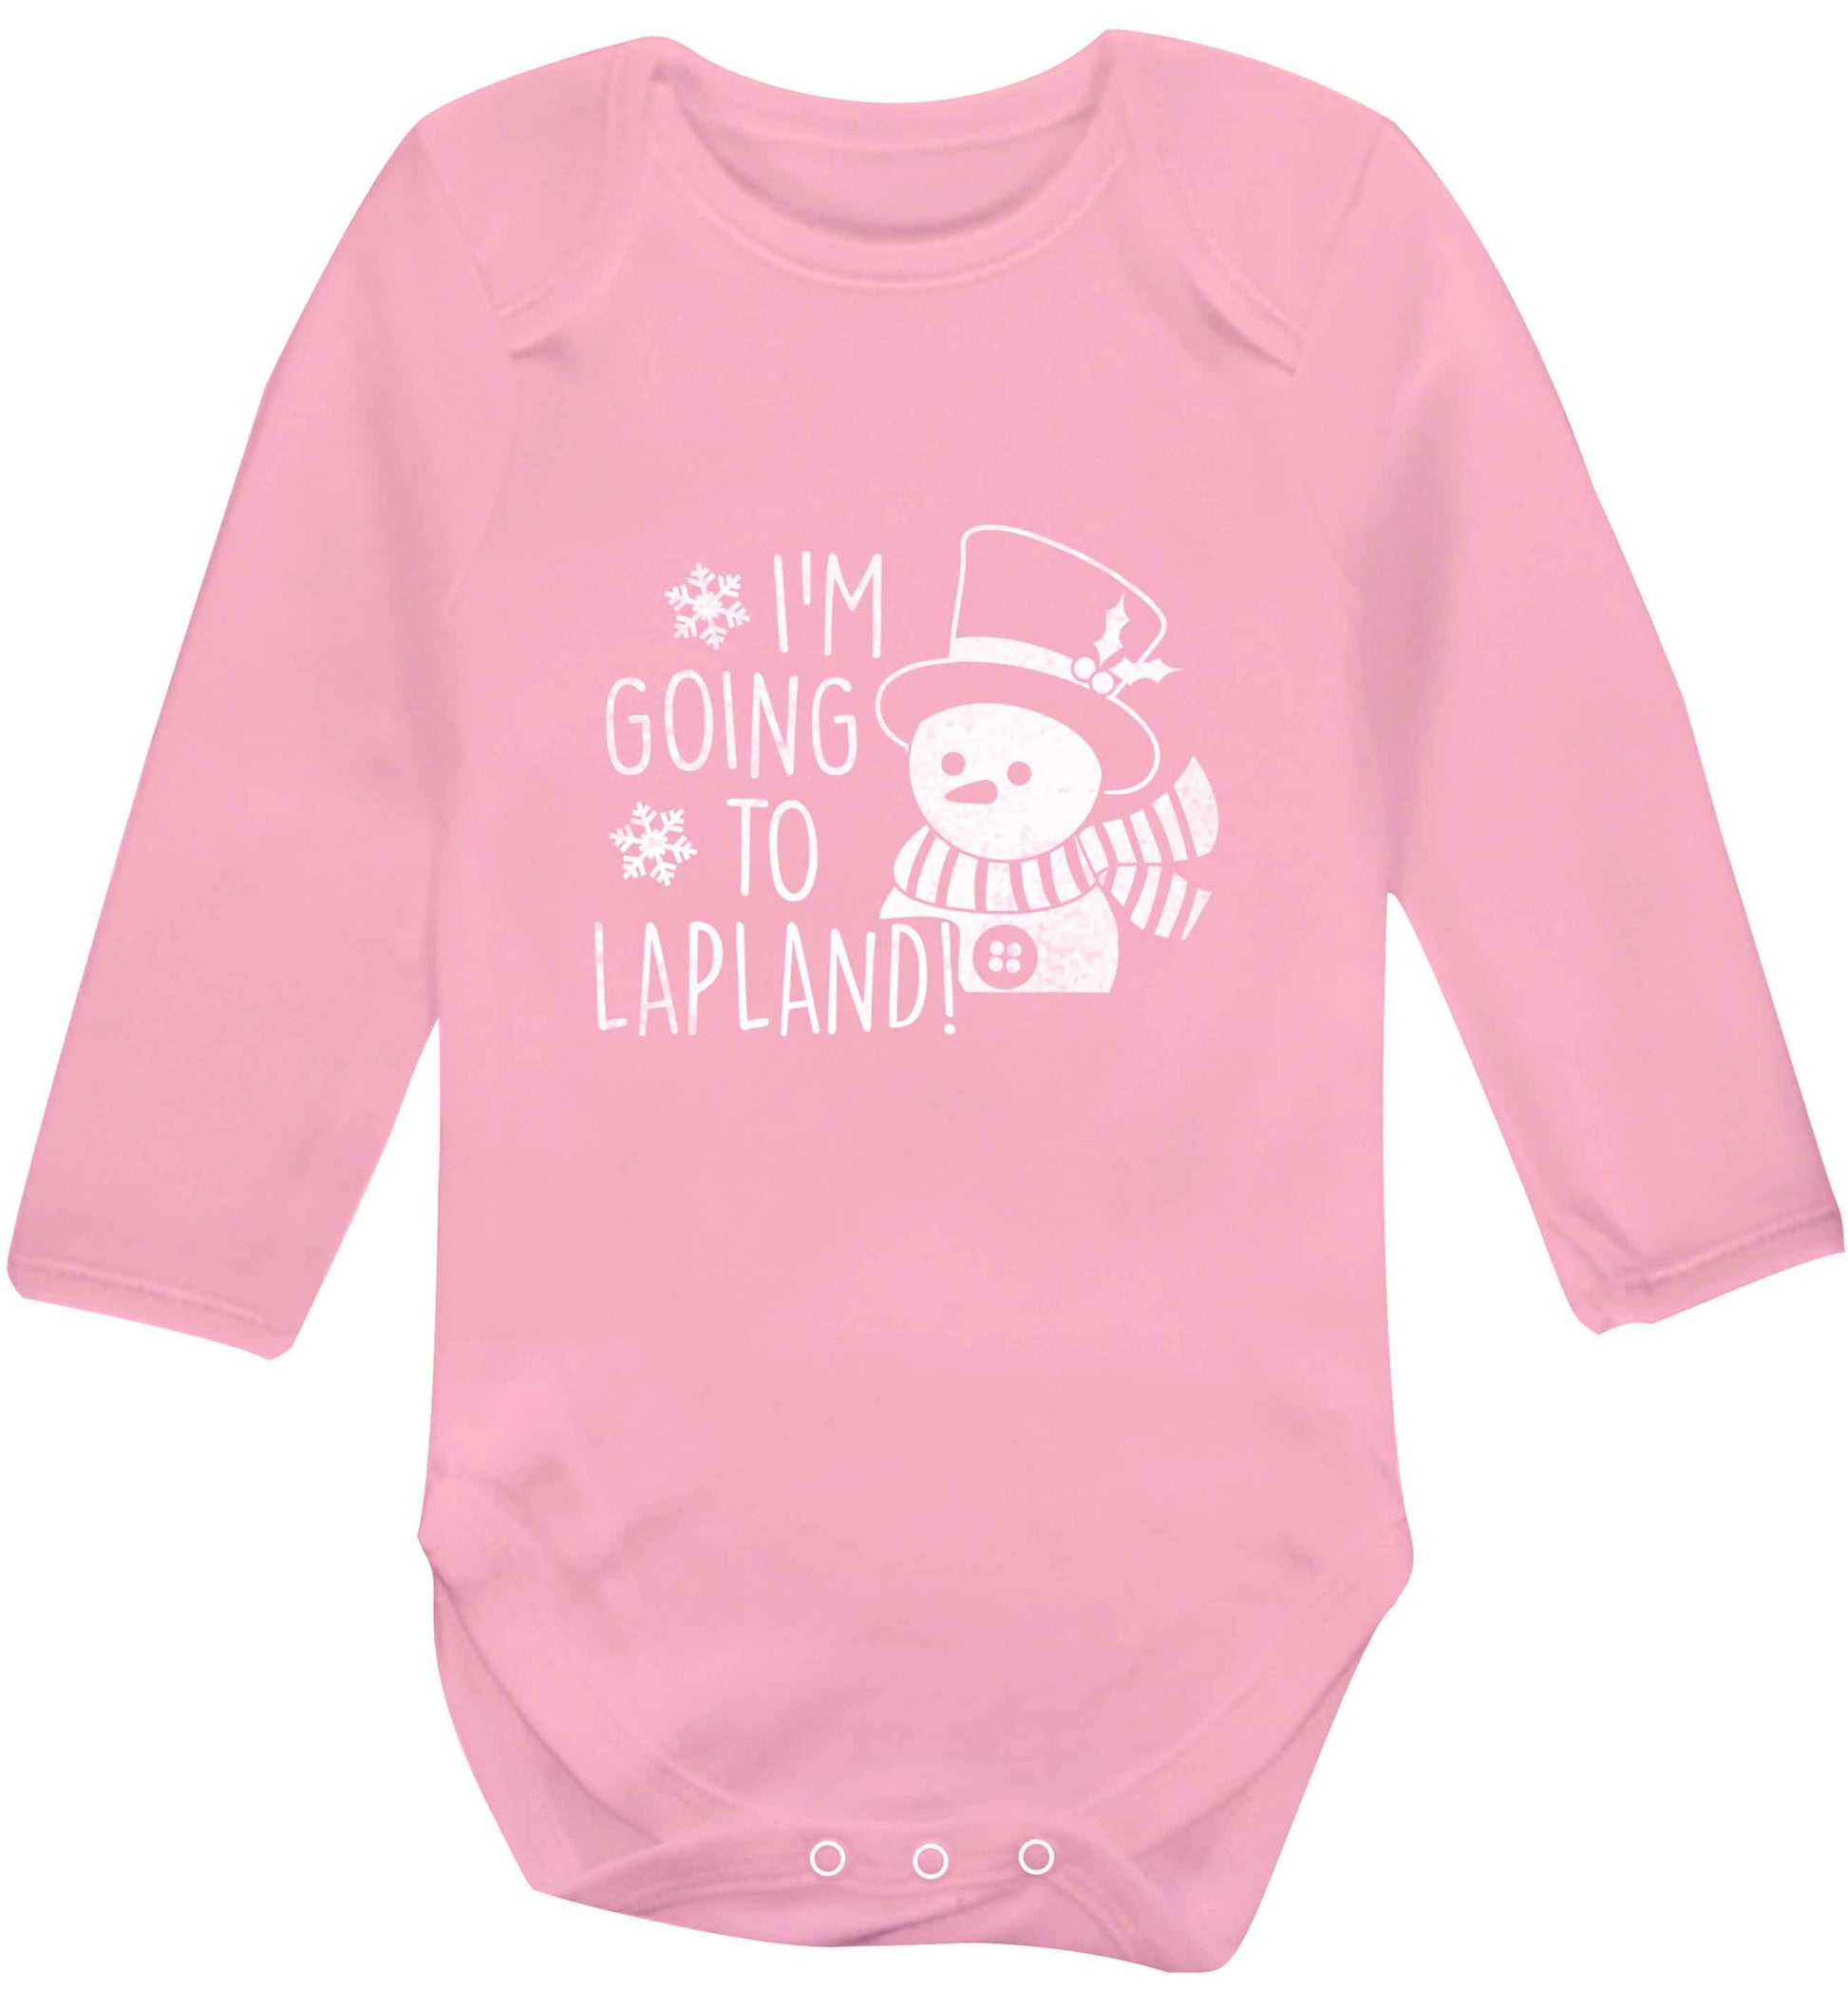 I'm going to Lapland baby vest long sleeved pale pink 6-12 months